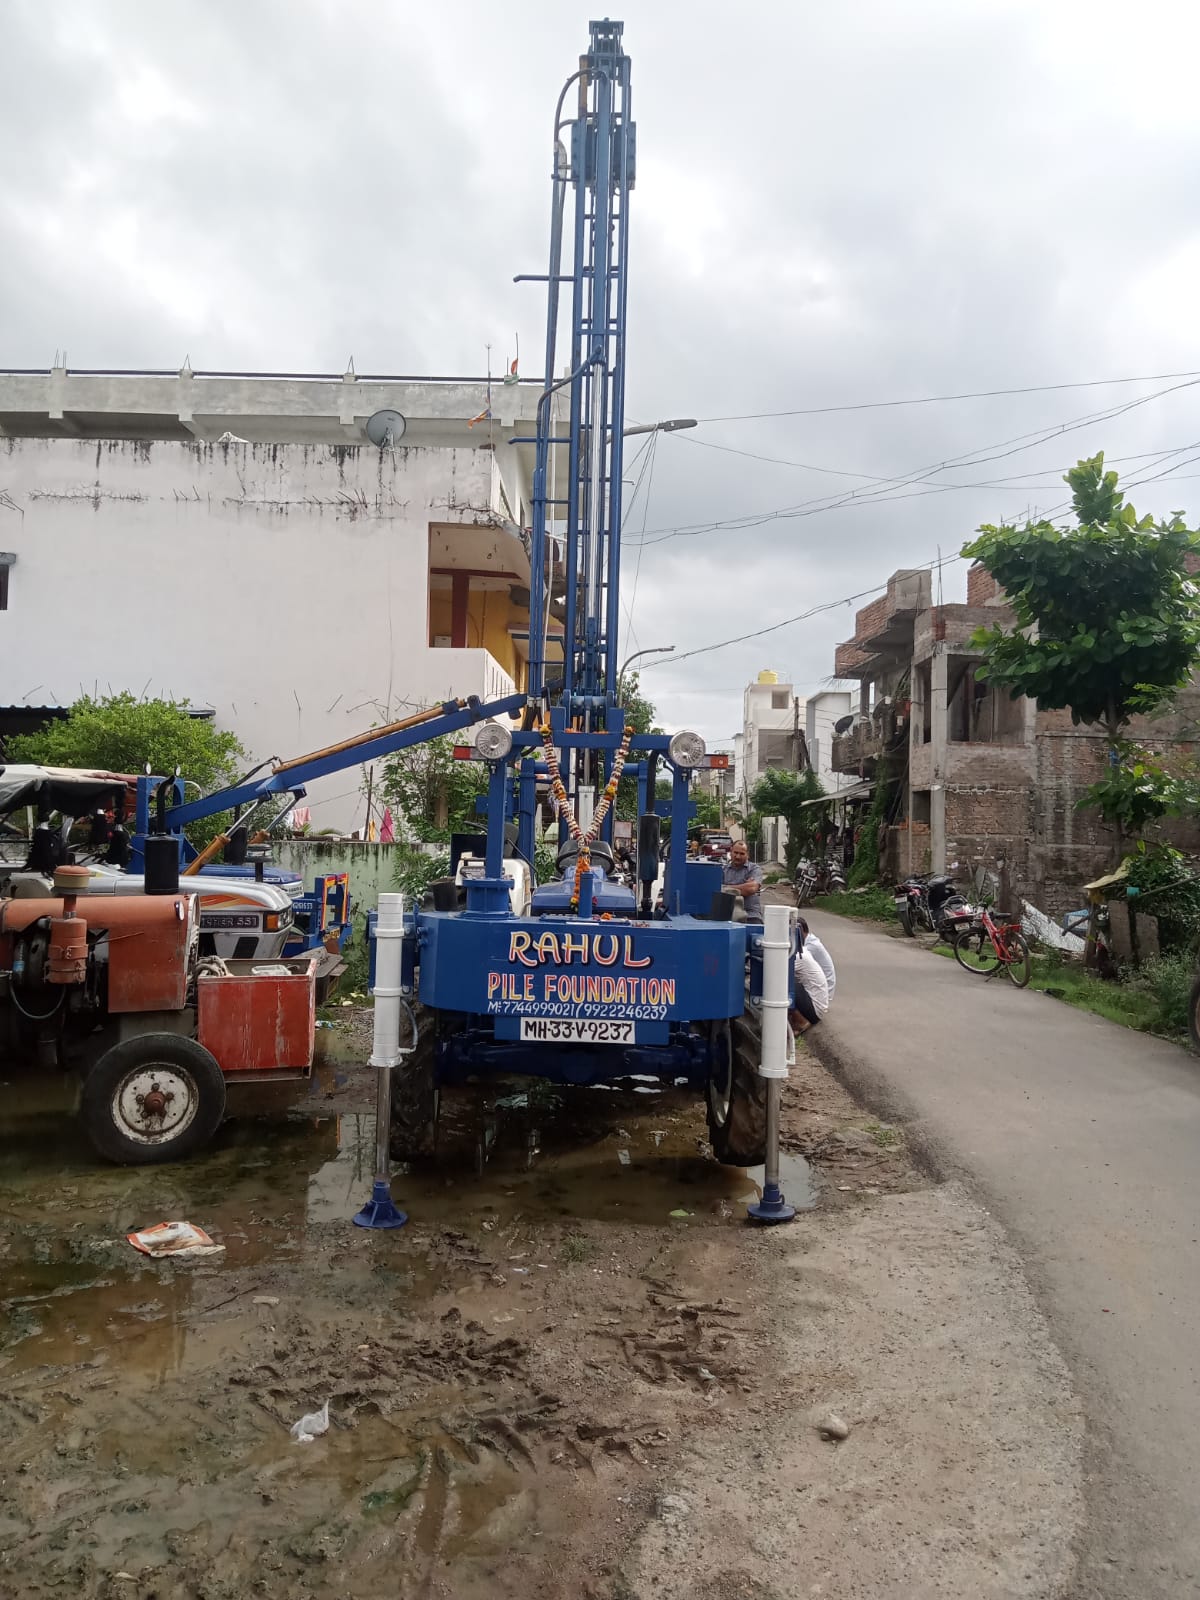 Piling Contractors in Mizoram, Nagaland, Meghalaya Pile FoundationTiara  Infra Pvt Ltd at Rs 250/piece in Indore